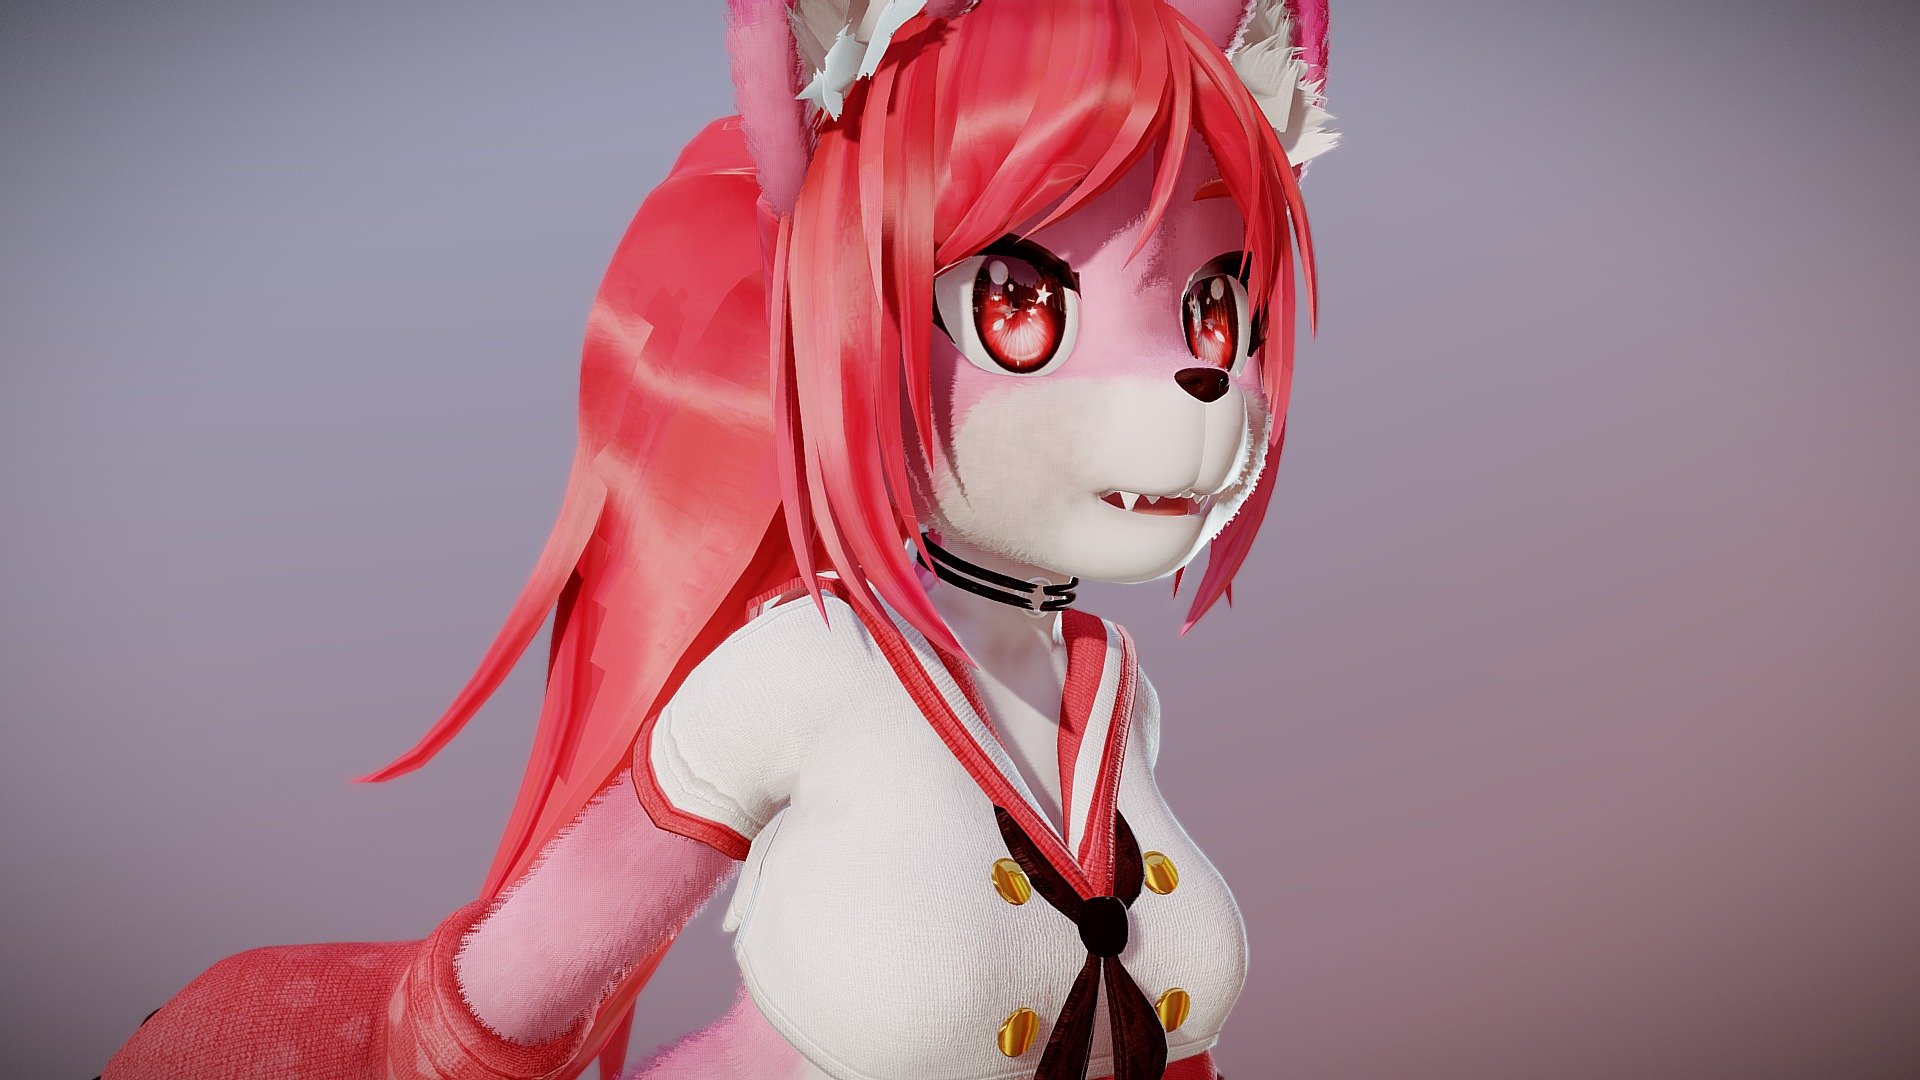 Commissions https://www.furaffinity.net/commissions/hickysnow/ - Linster Fox - 3D model by HickySnow (@Hicky_Snow) 3d model